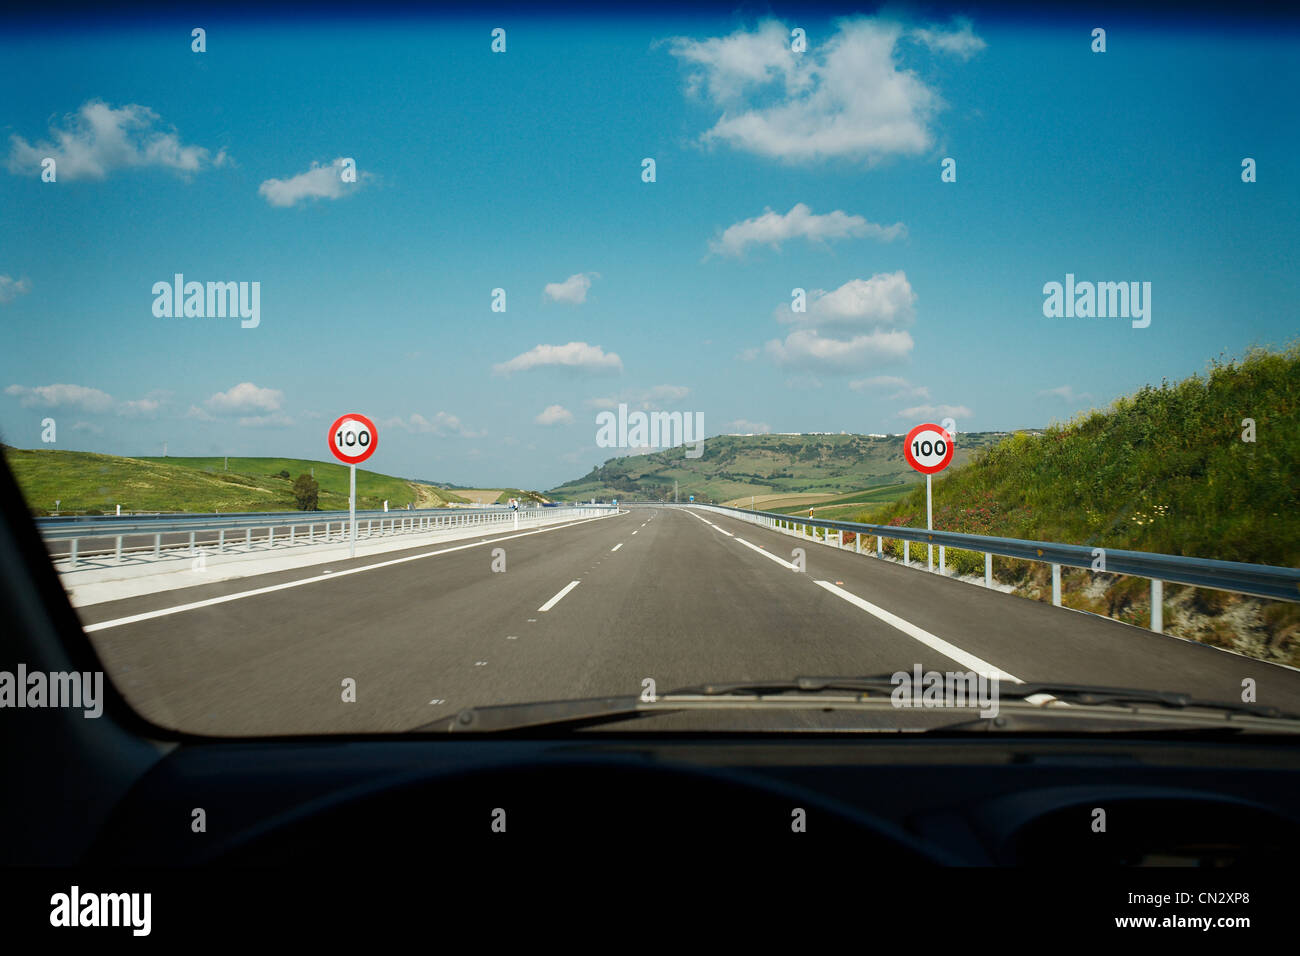 View of road through car windscreen Stock Photo